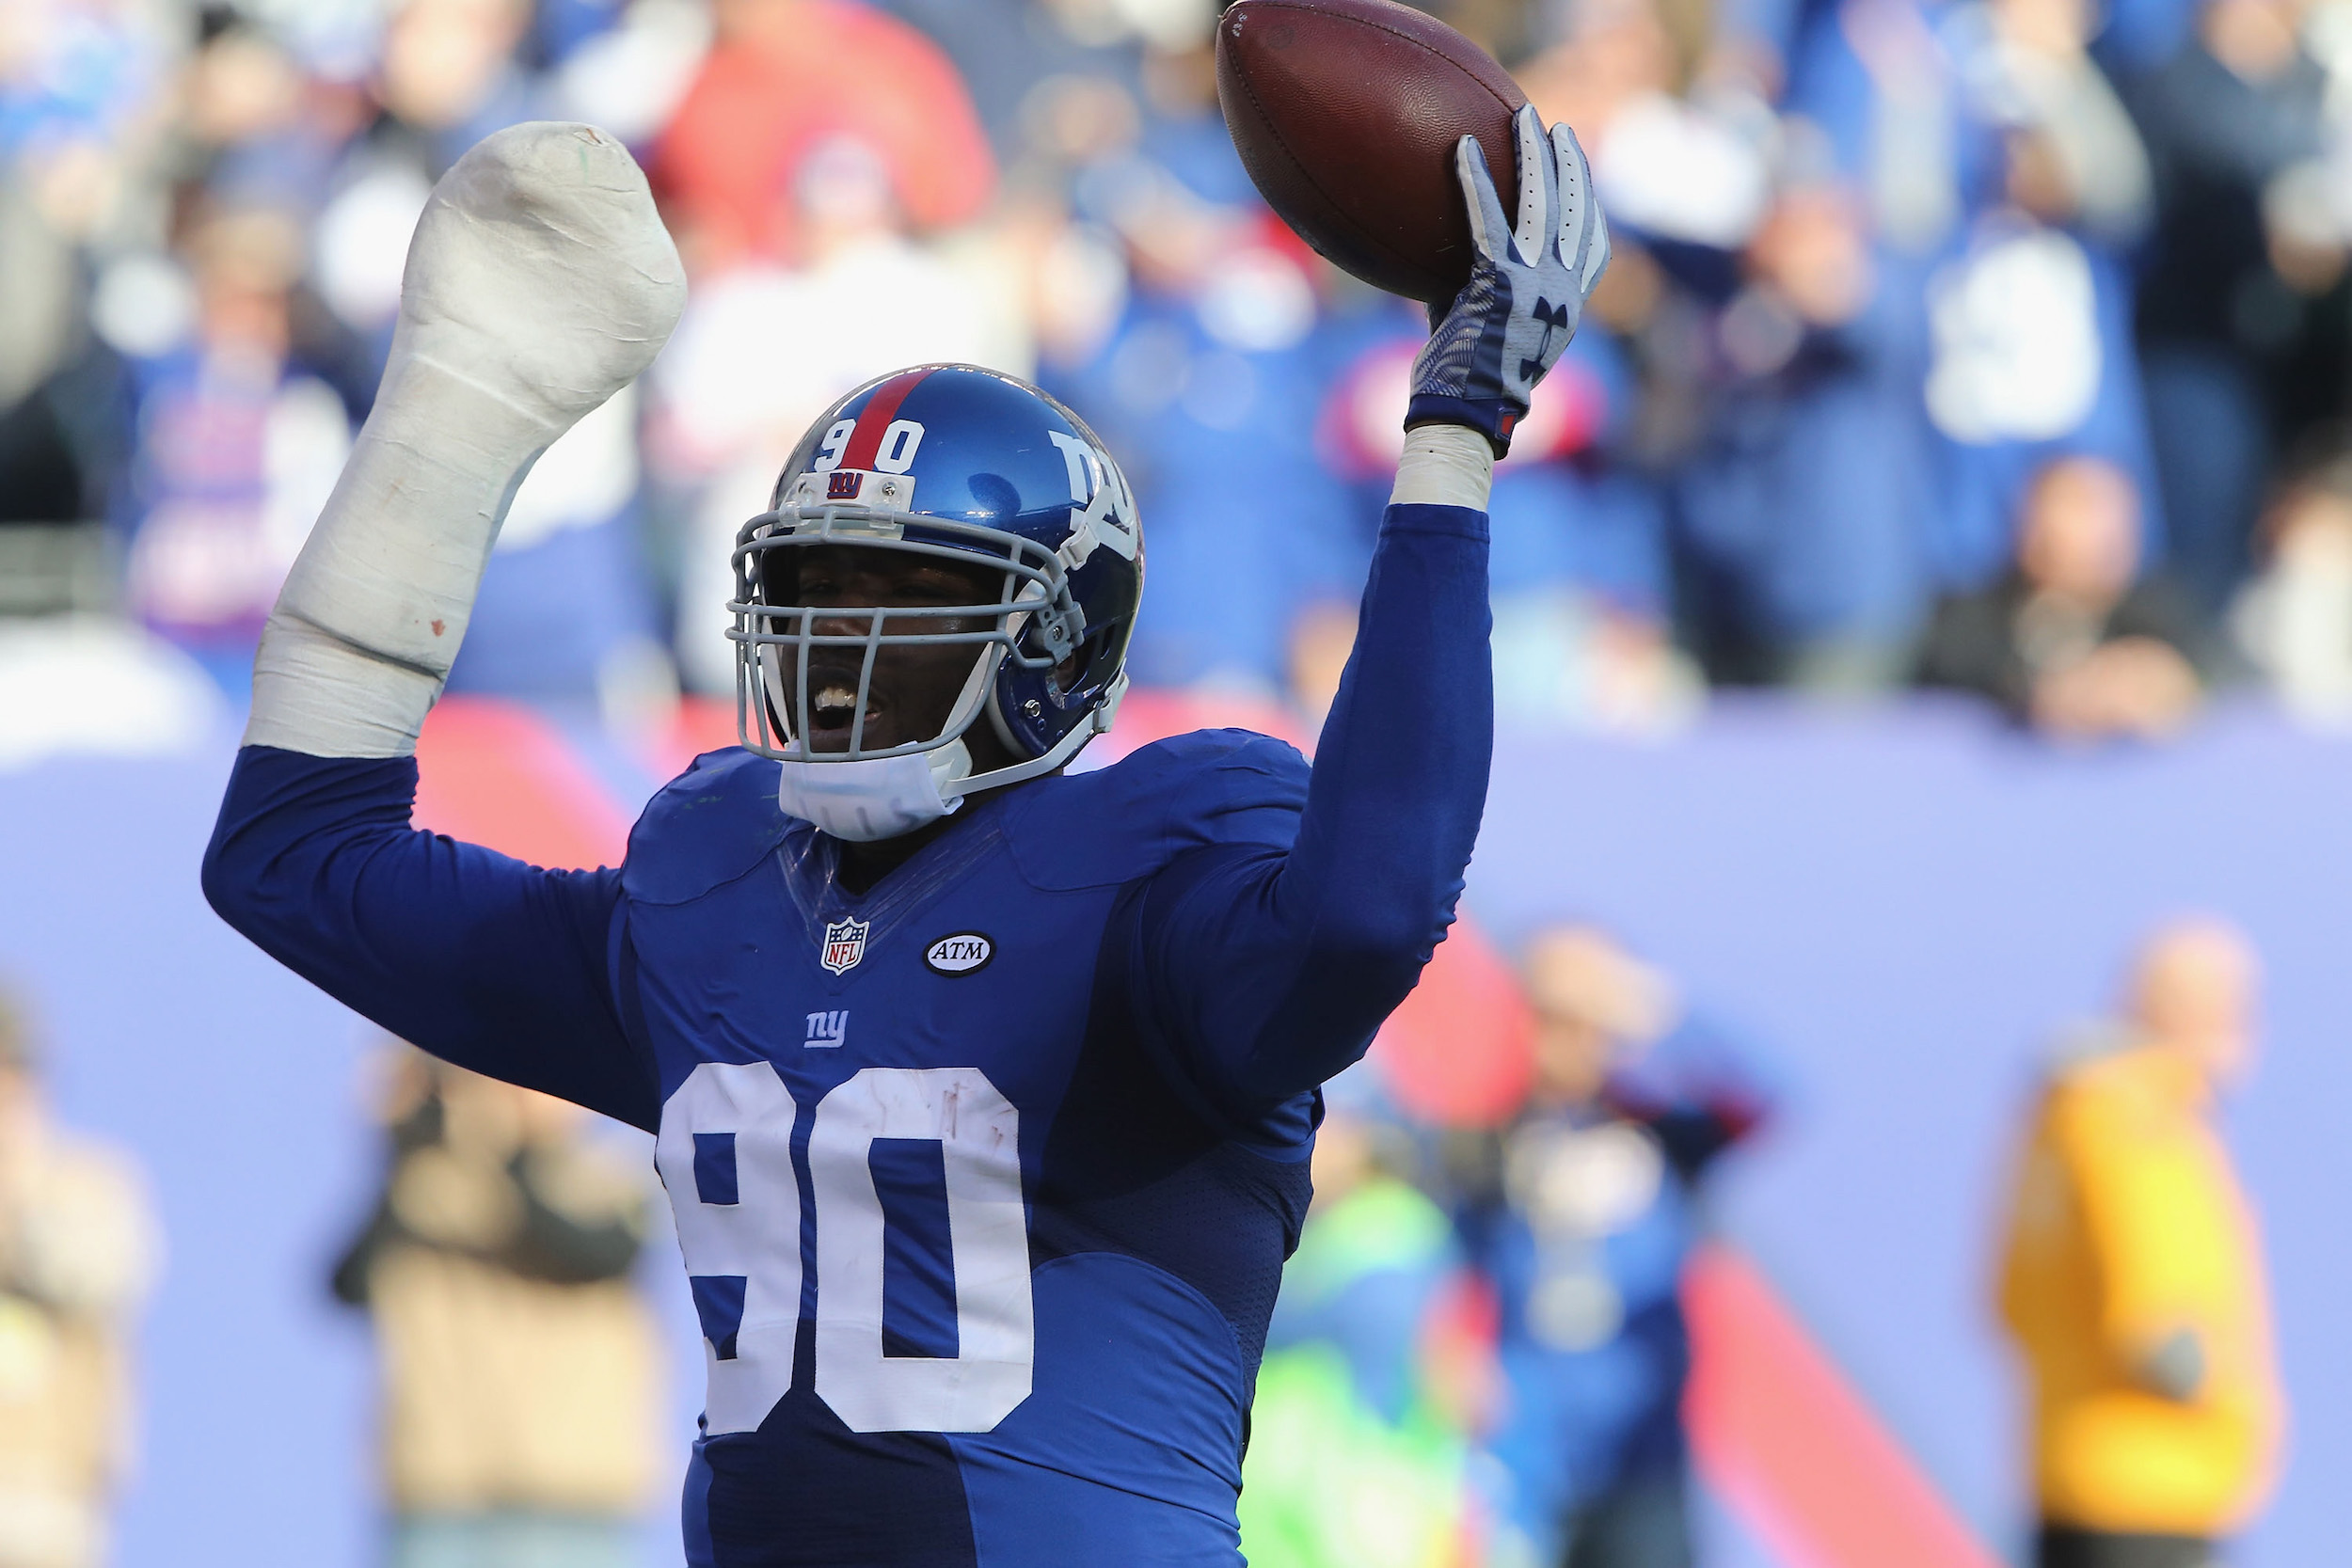 Jason Pierre-Paul suffered a serious hand injury setting off fireworks in 2015.